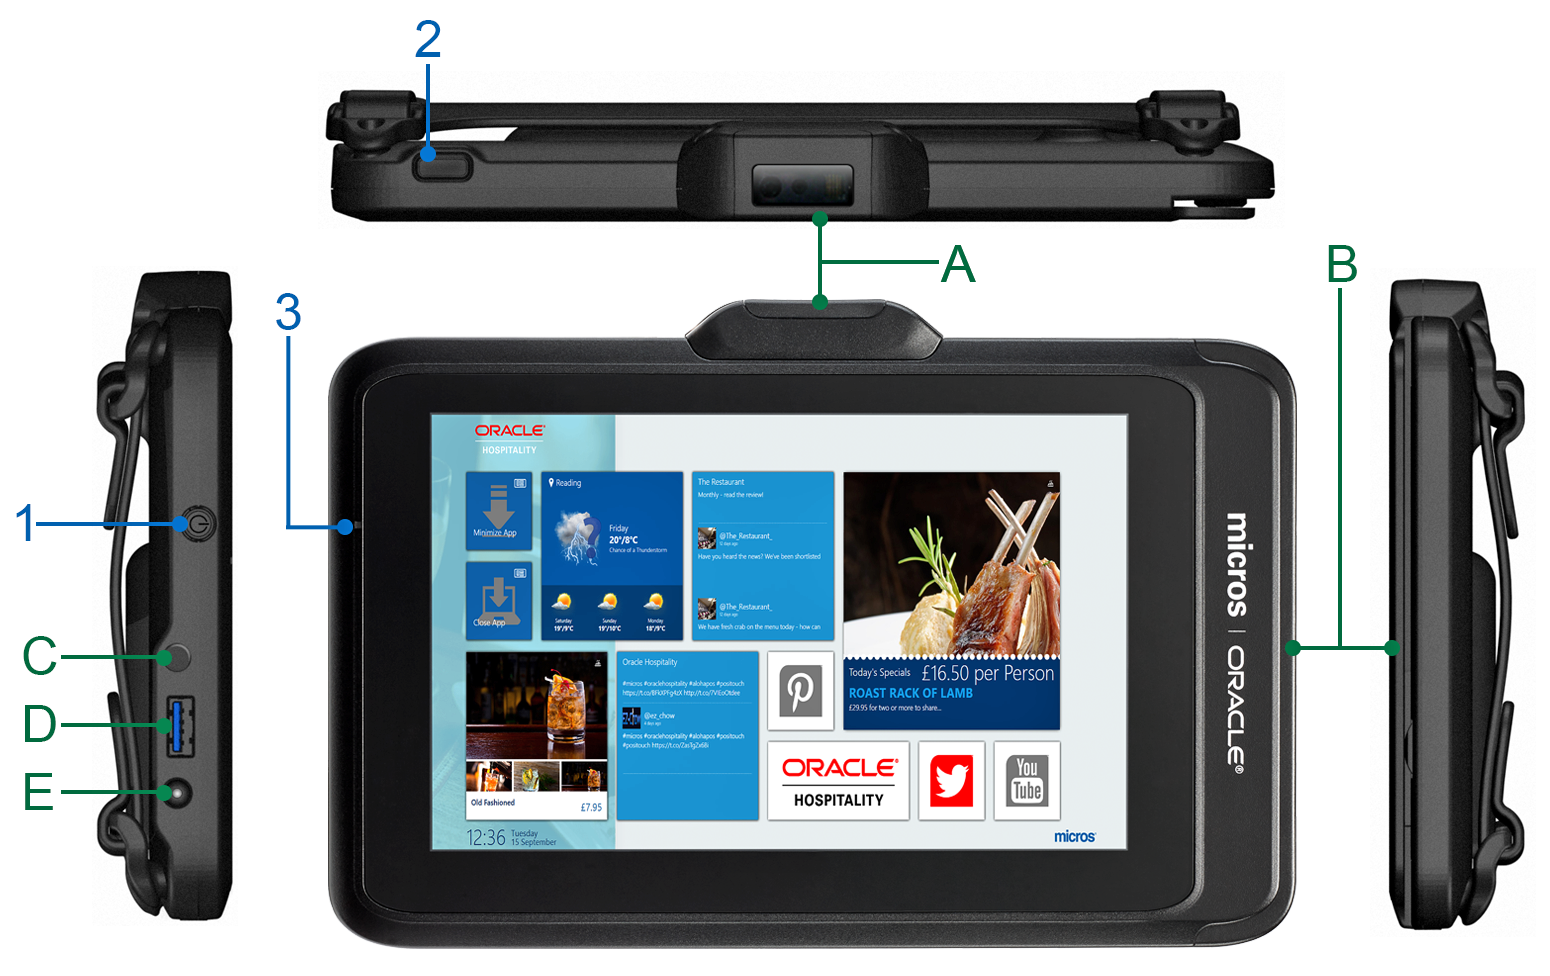 This figure shows the features of the Oracle MICROS Tablet 721 using the front and side views of the tablet.